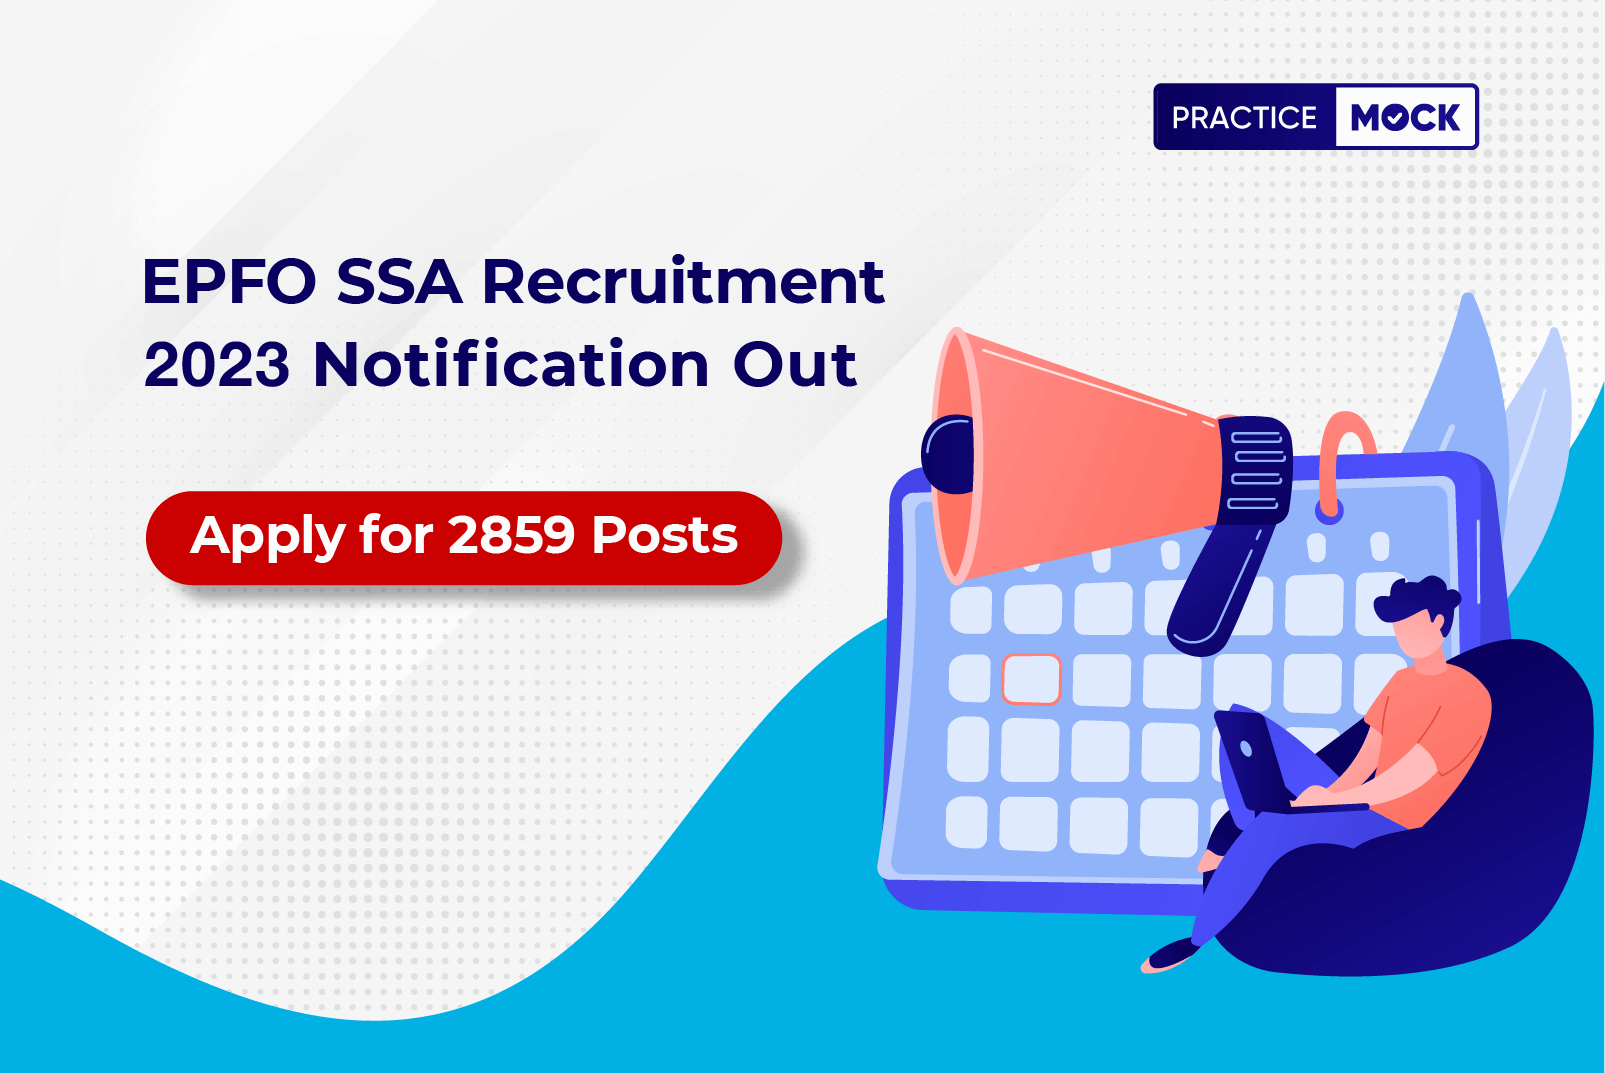 EPFO SSA 2023 Notification Out-Apply for 2859 Posts